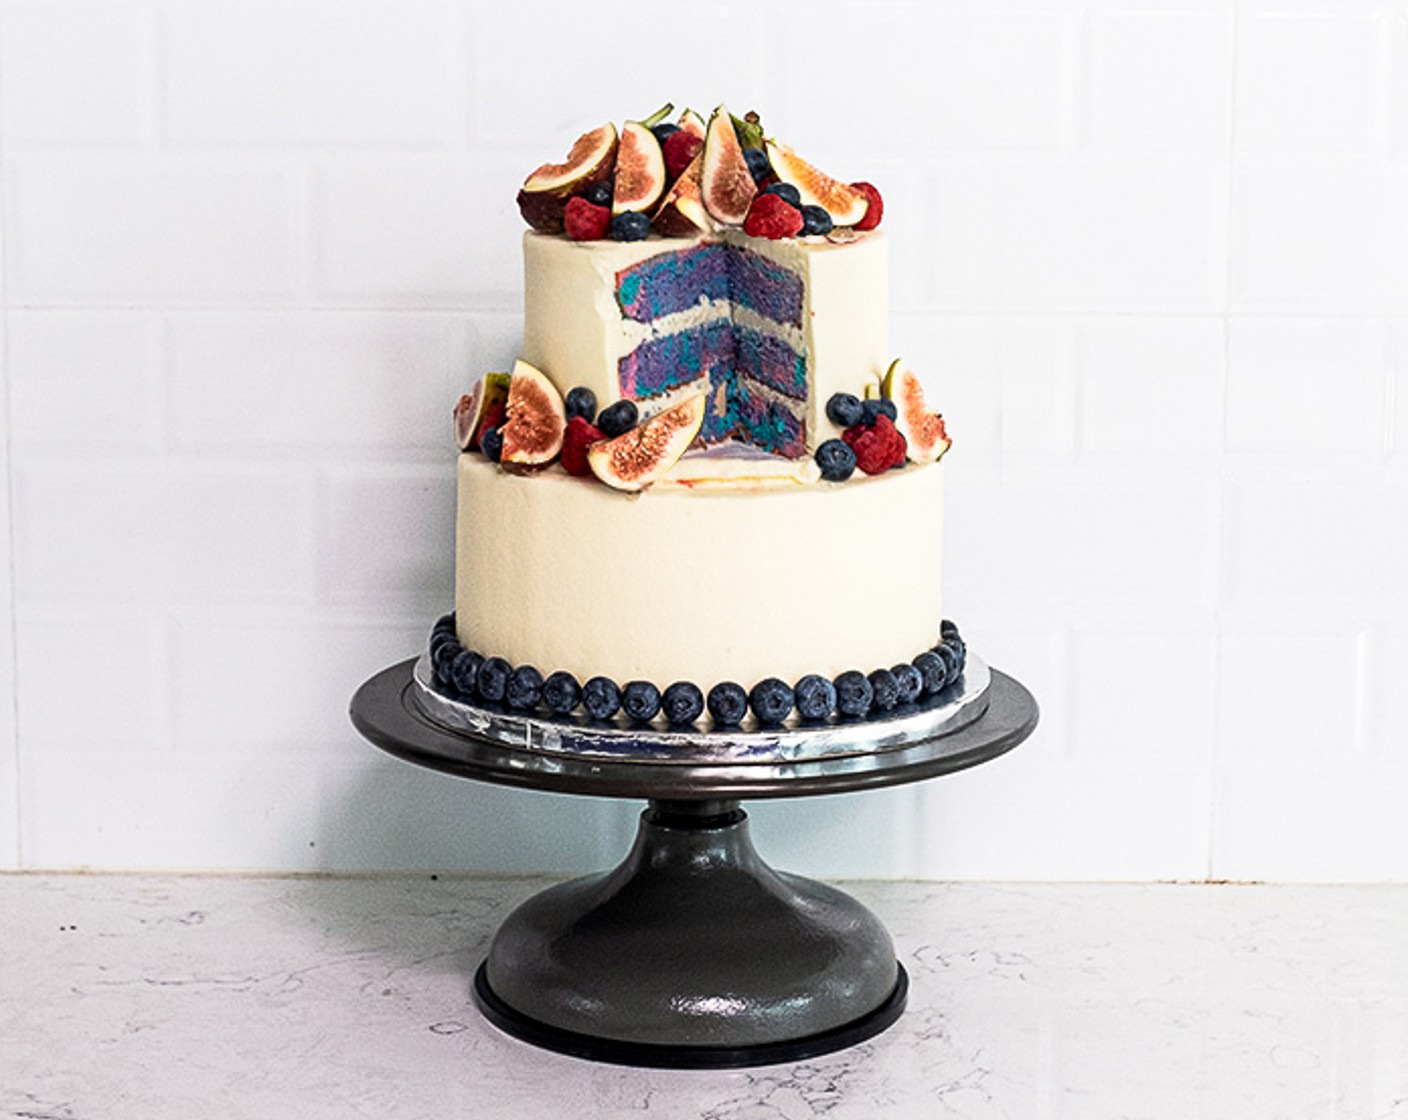 Tiered Cake with Multi-Colored Layers and Fresh Berries